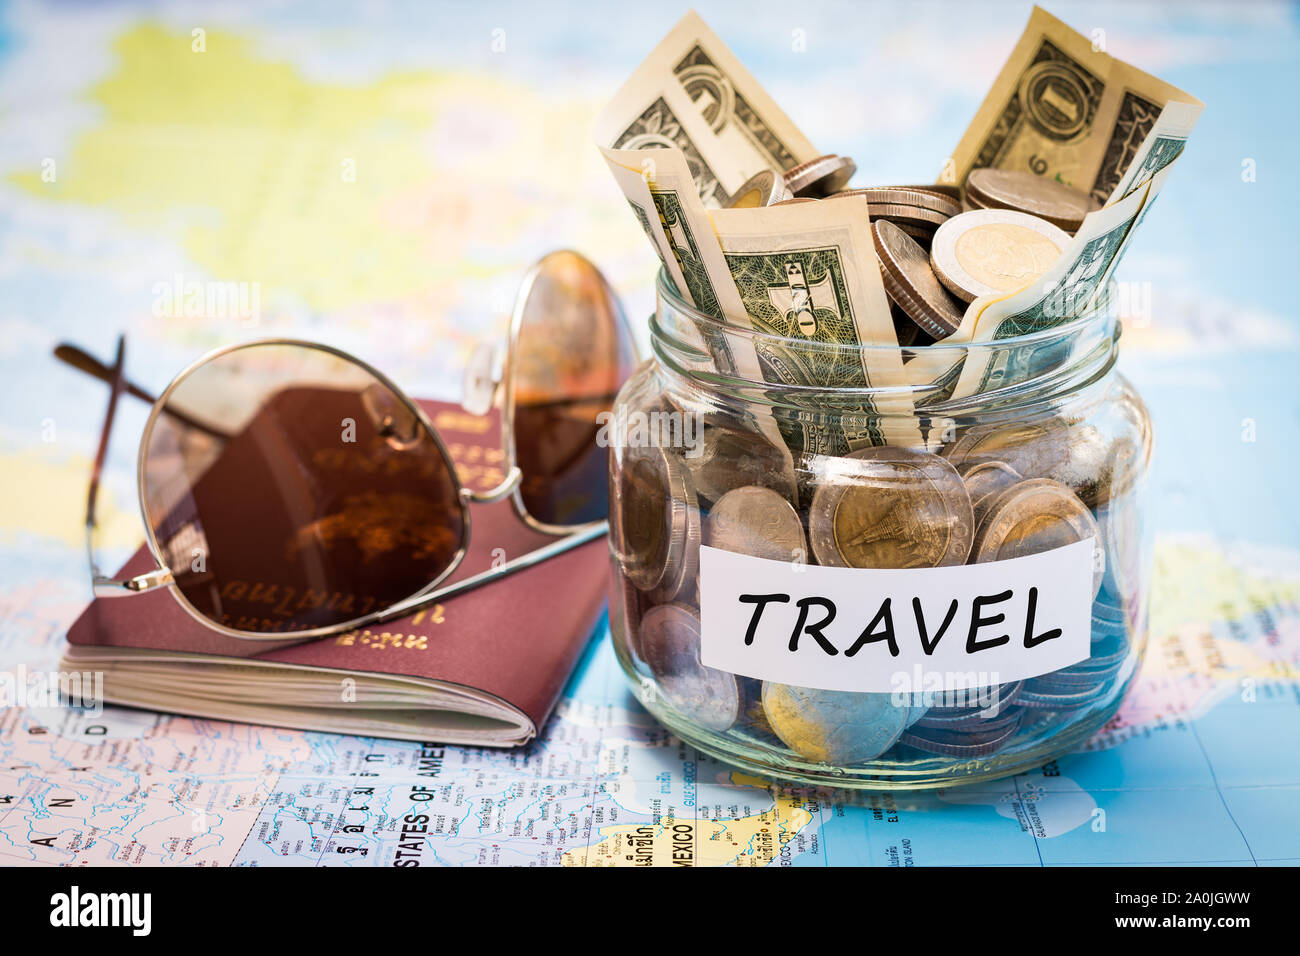 Travel budget concept. Travel money savings in a glass jar with passport and sunglasses on world map Stock Photo